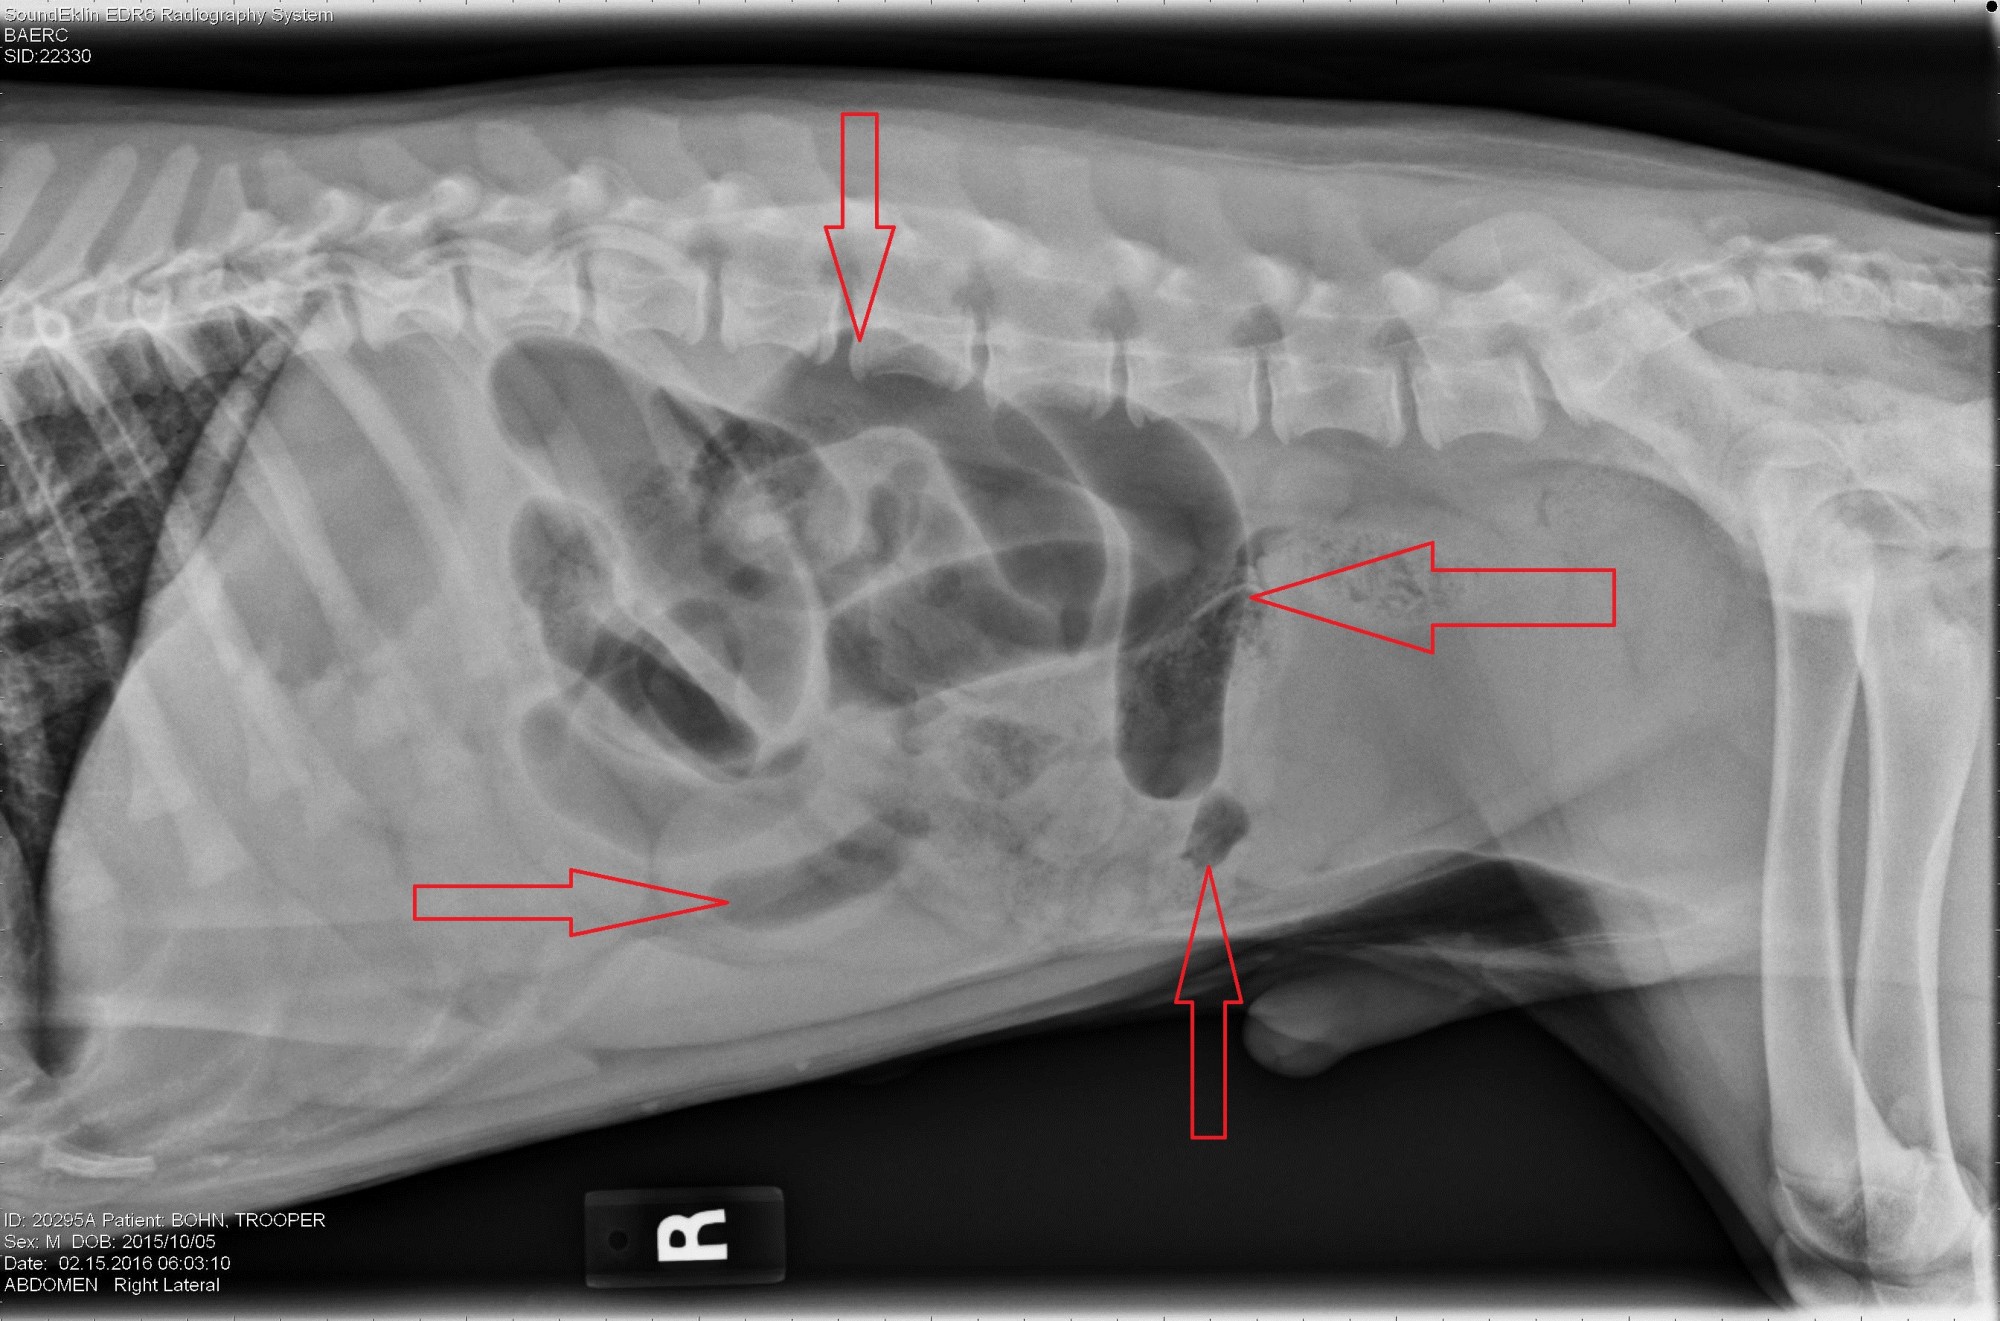 The x-ray shows typical gas bubbles of various sizes and shapes and a potential foreign body.